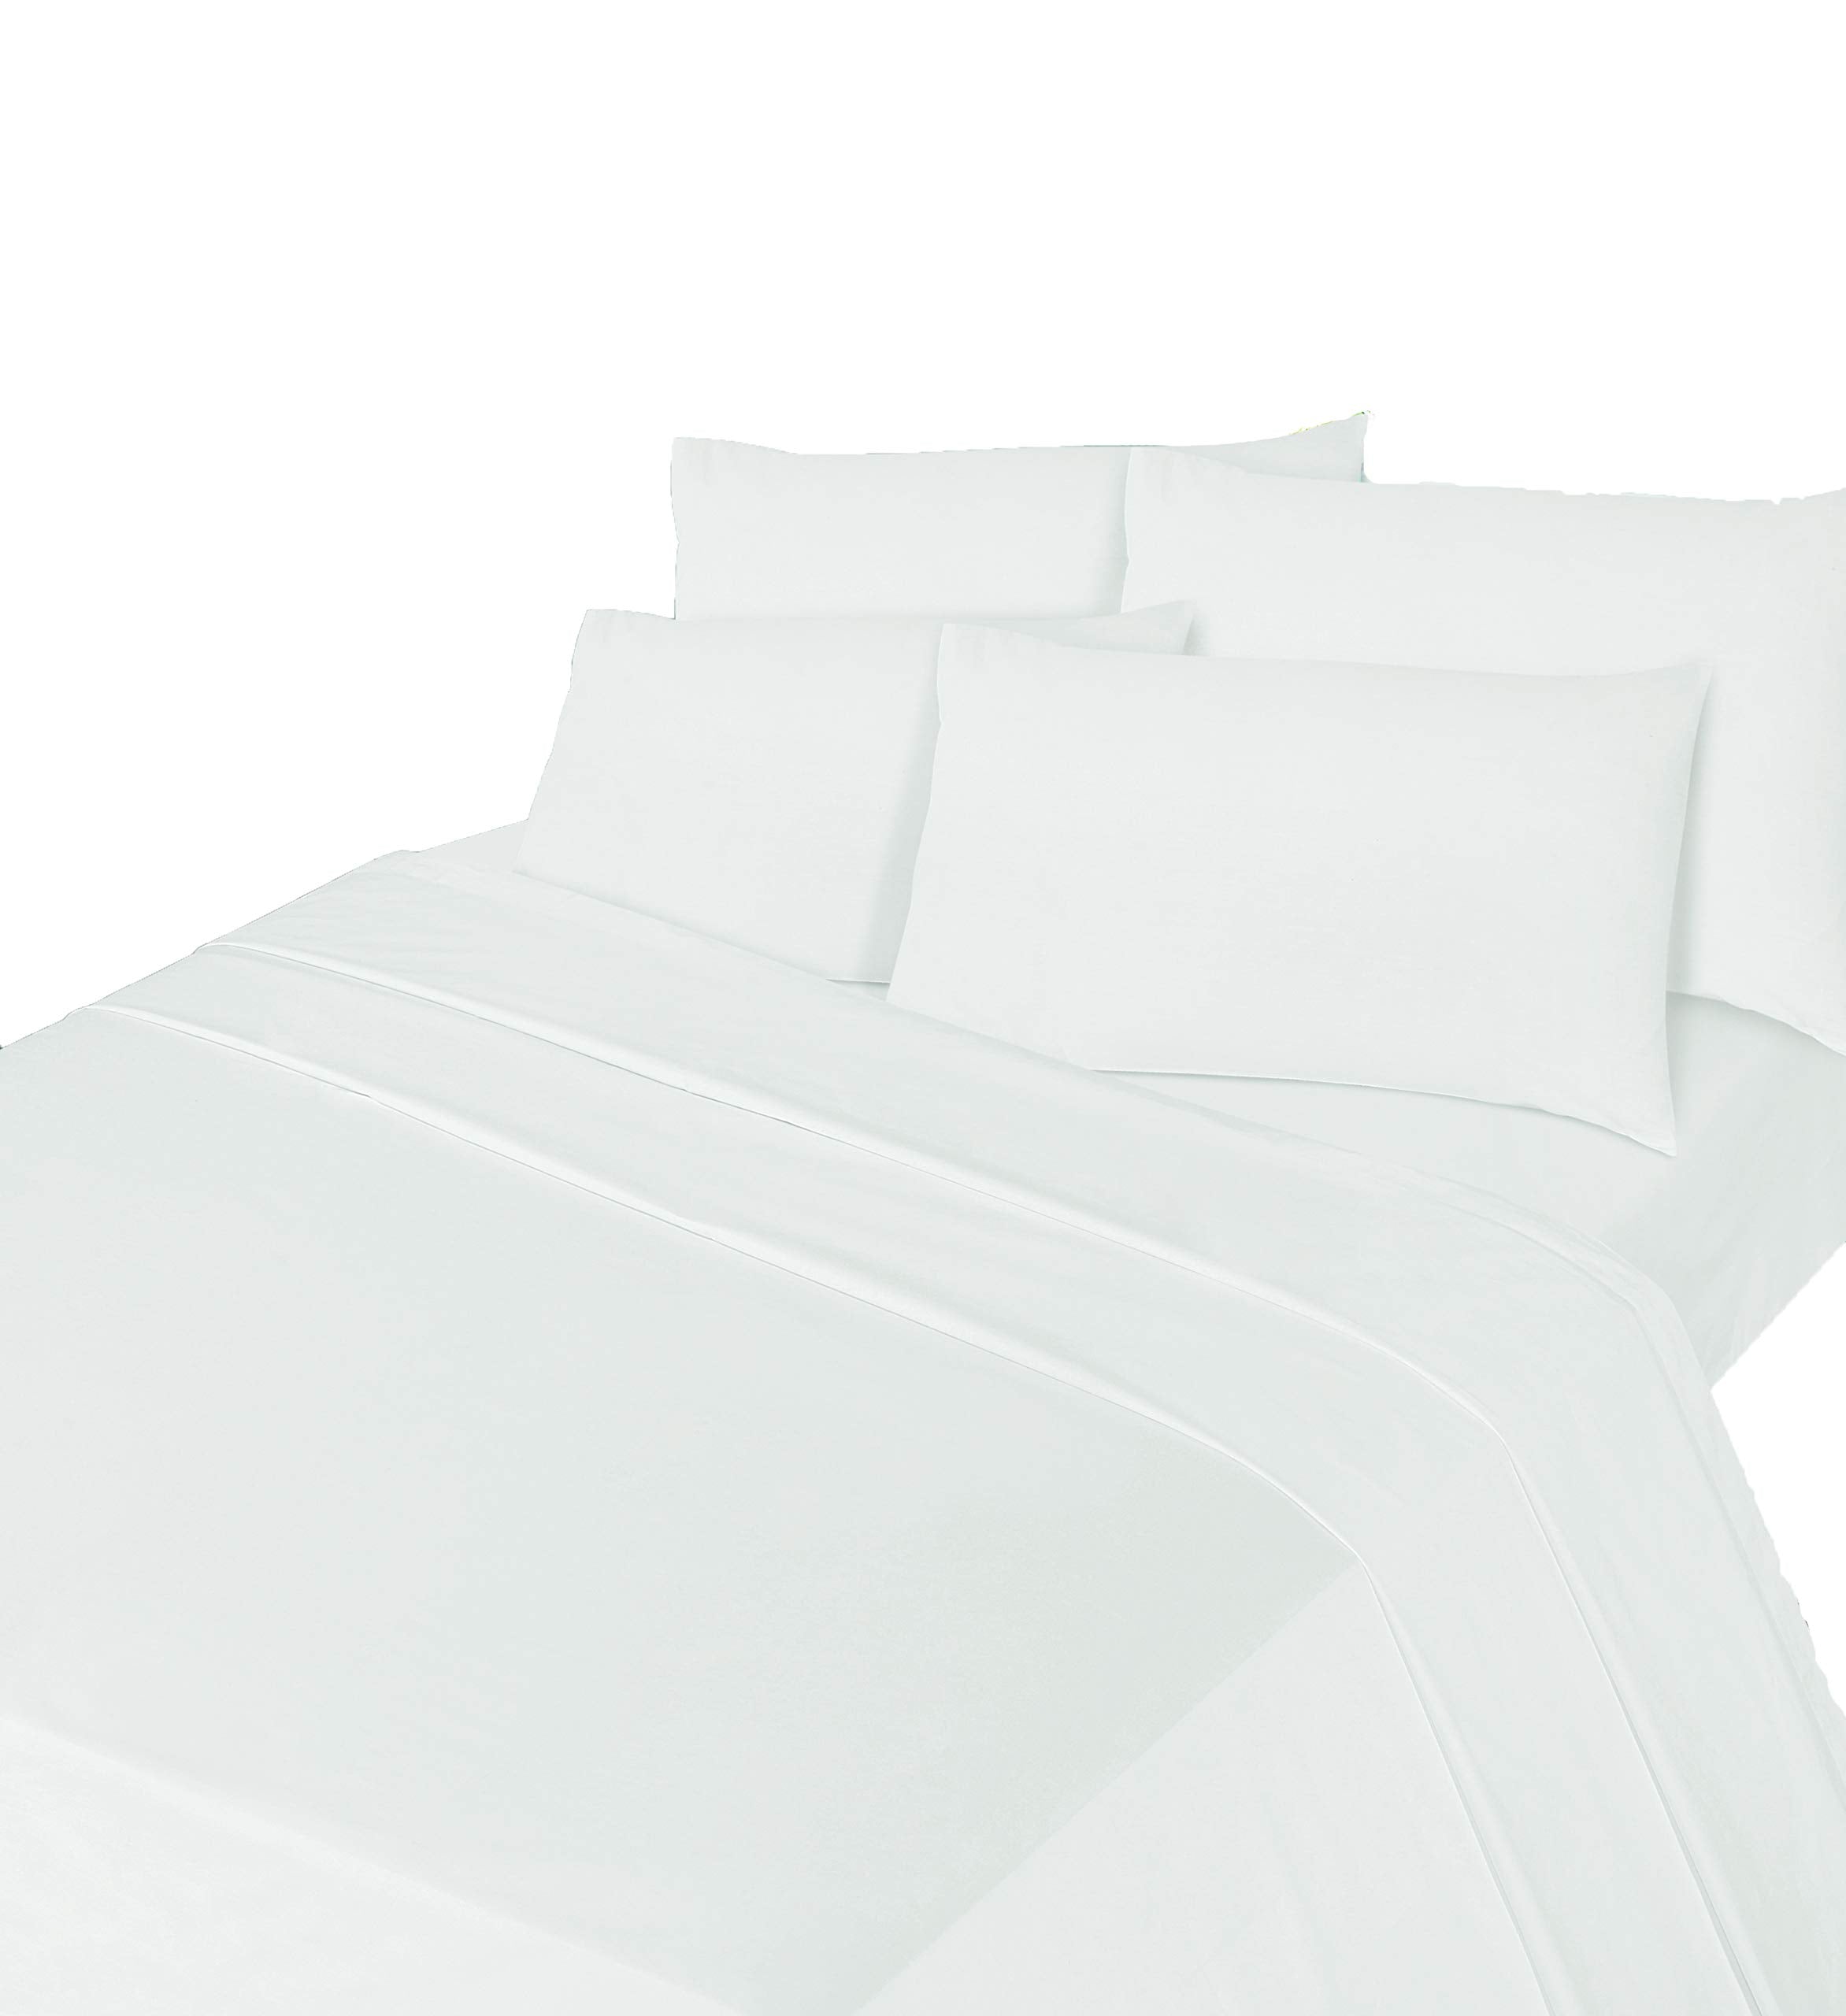 Comfy Nights Brushed Thermal Cotton Flannelette Fitted Sheet or Pillow Pair, Super King - White